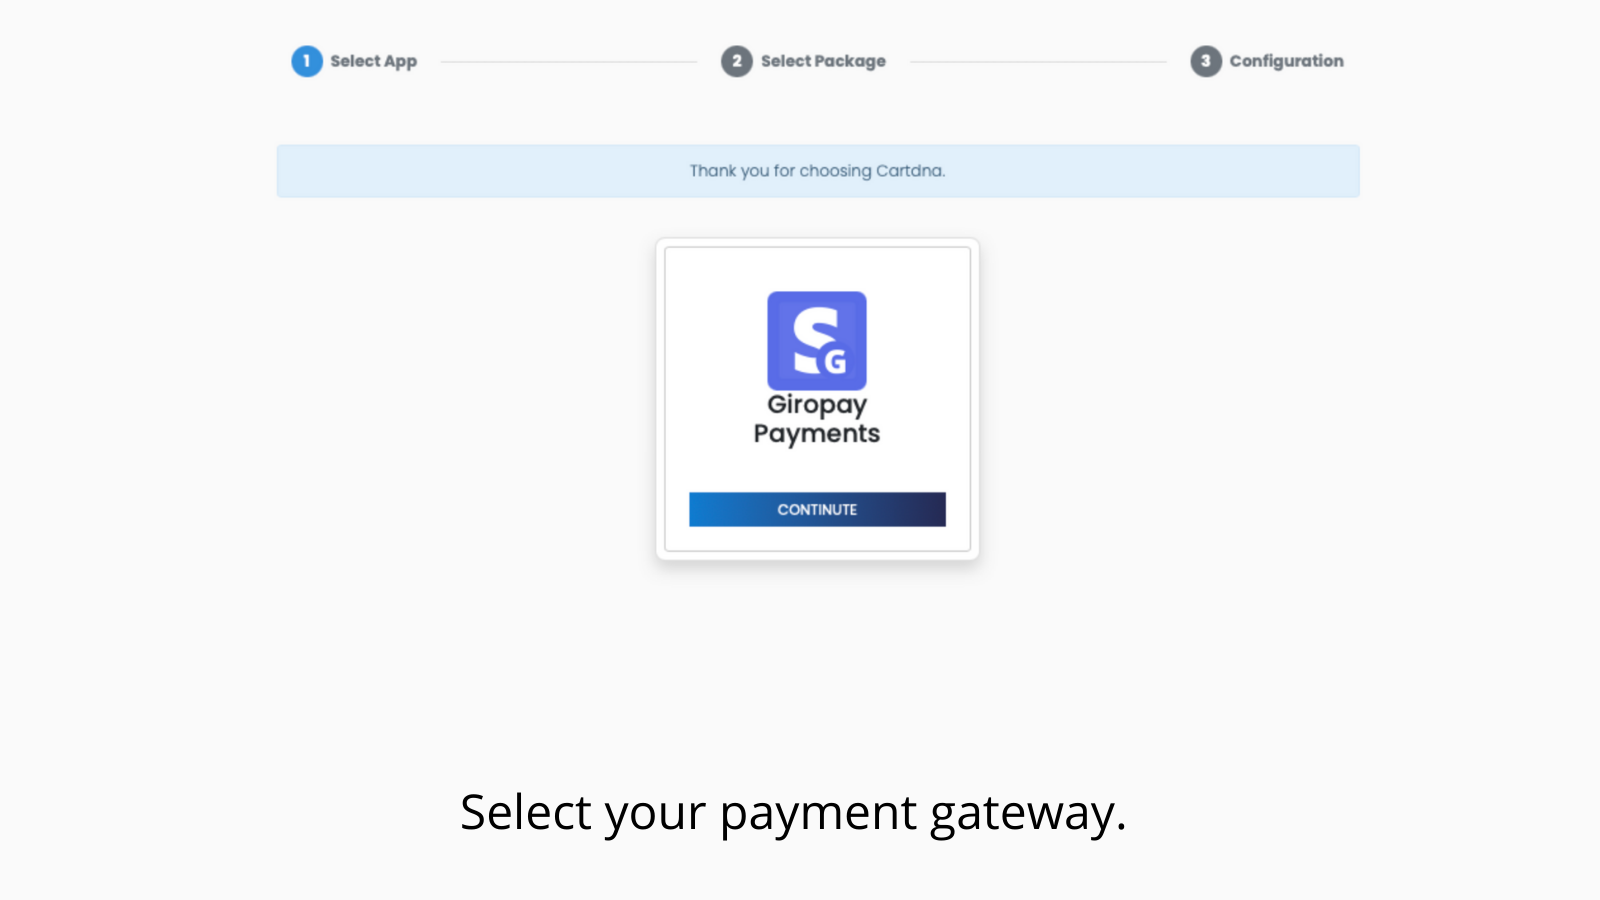 Select your payment gateway